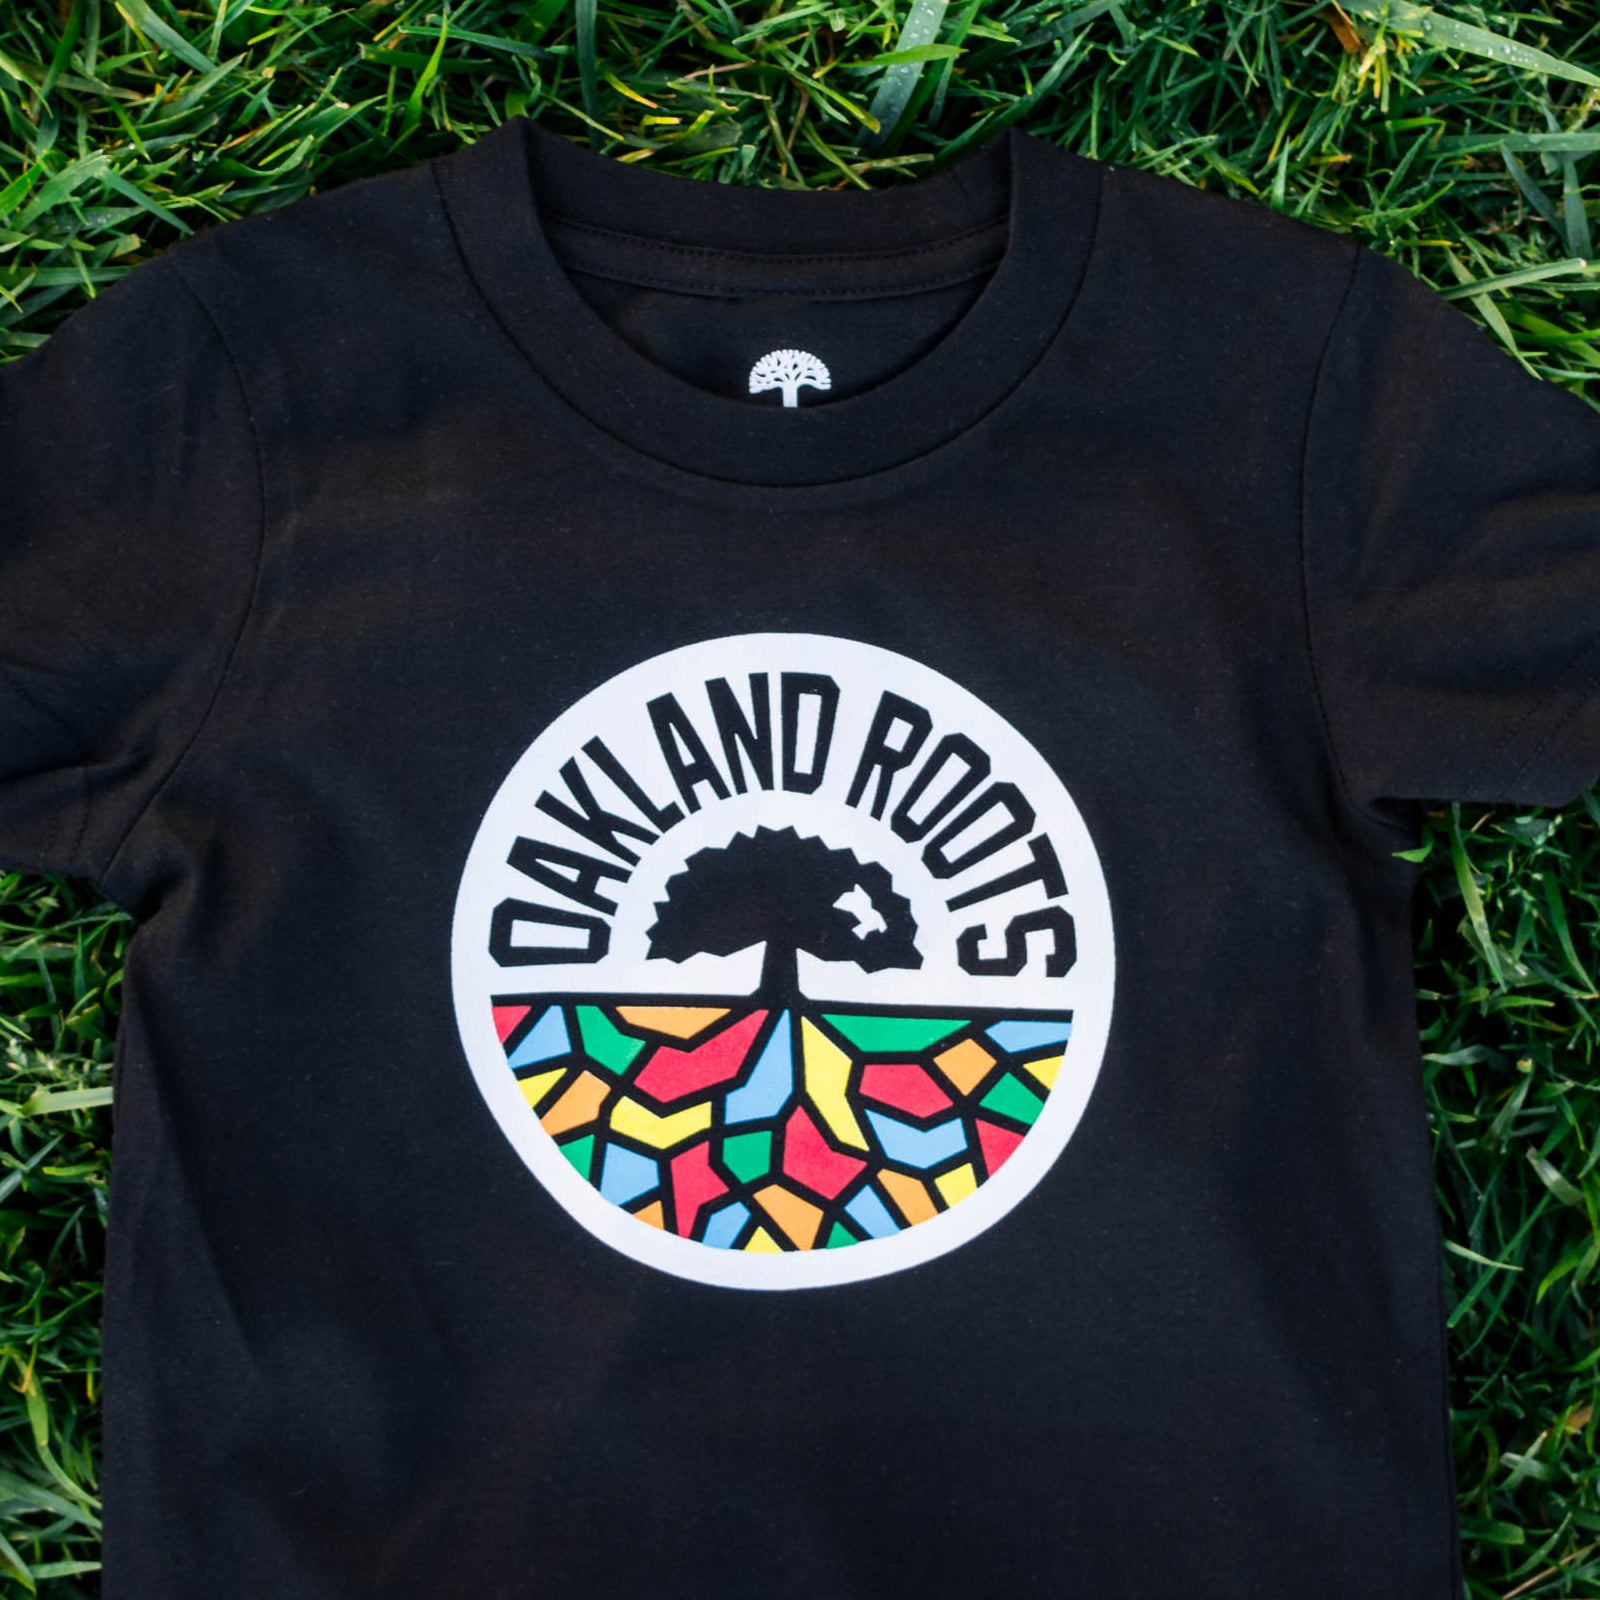 Three-quarter view of a black toddler sized t-shirt with a full-color Roots SC logo on the chest